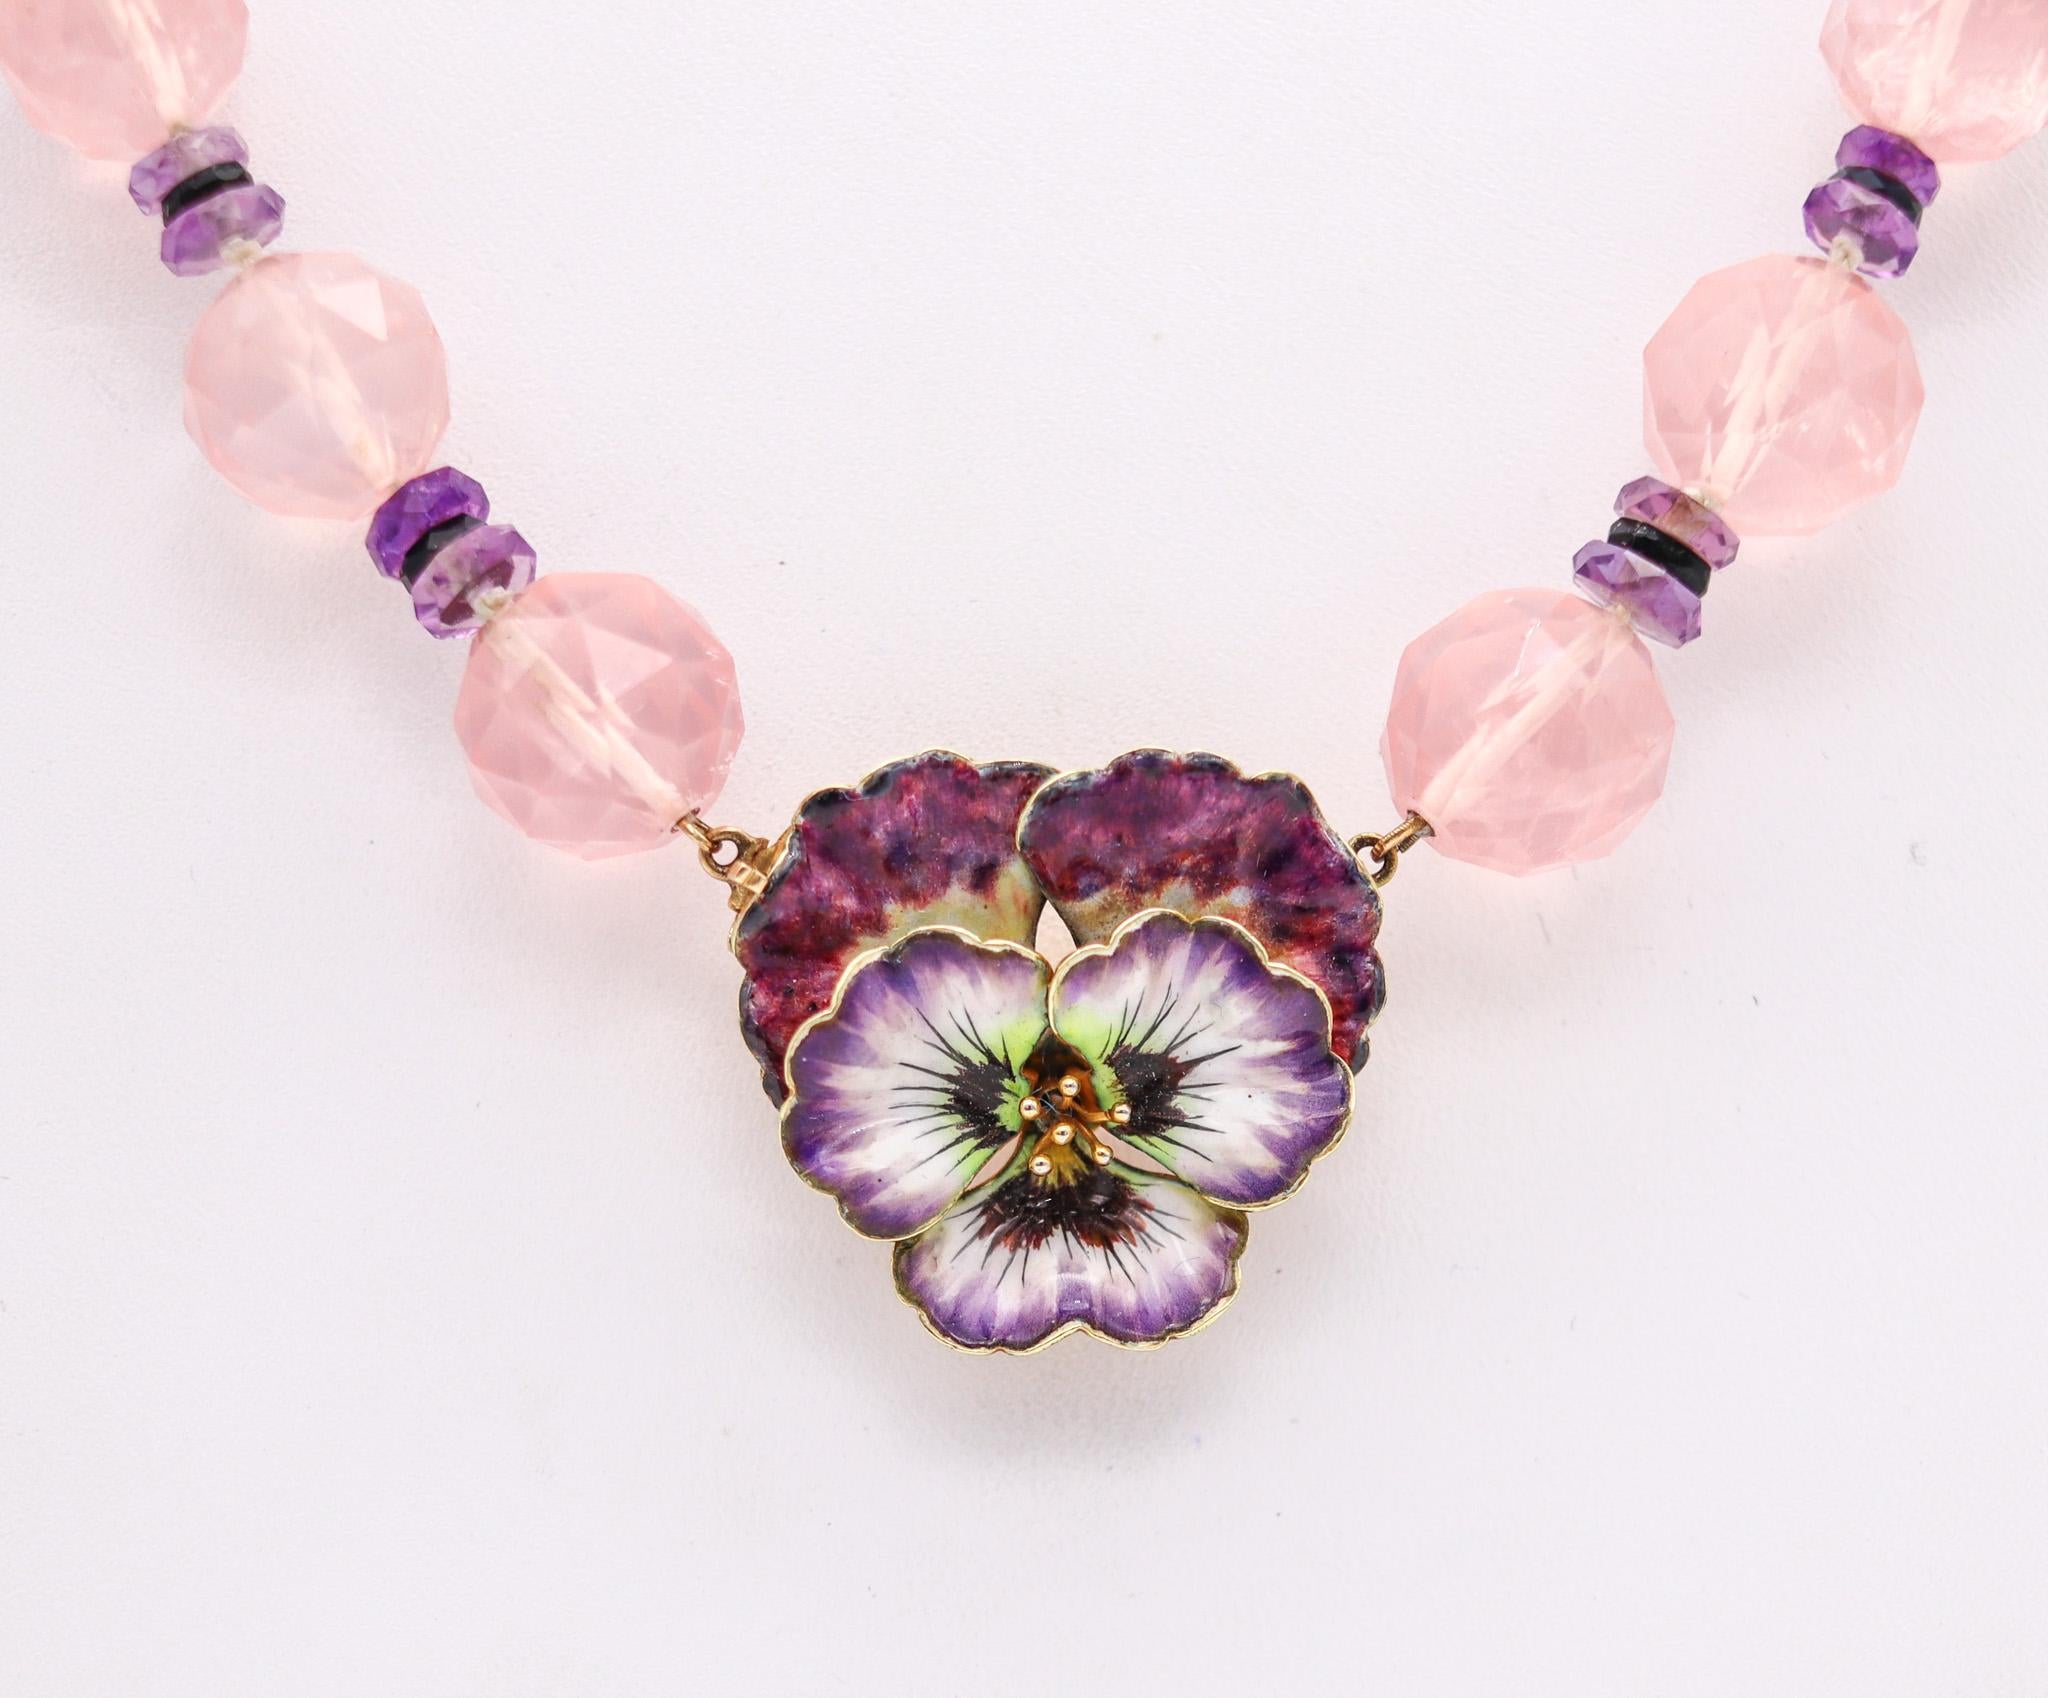 Art nouveau necklace with enamel pansy flower.

Colorful necklace with a Pansy flower motif, created in America during the Edwardian and the Art Nouveau periods, back in the 1900.. This beautiful graduated necklace is attached to the Pansy flower